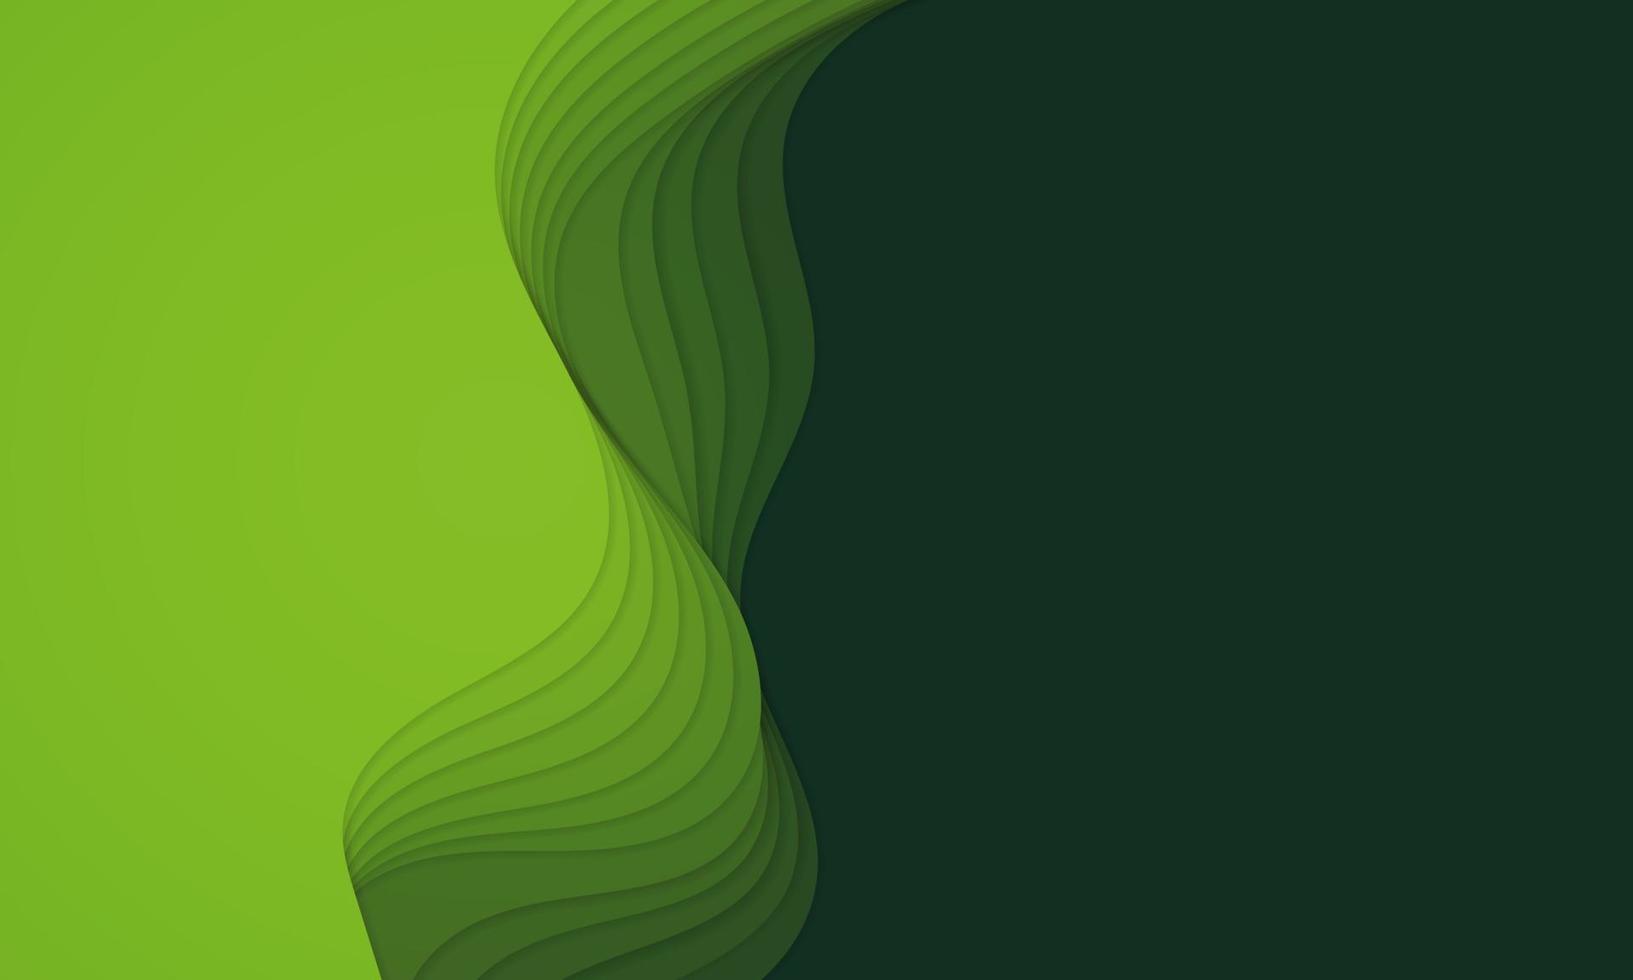 3d abstract background with paper cut shape. colorful green carving art. - Vector. vector